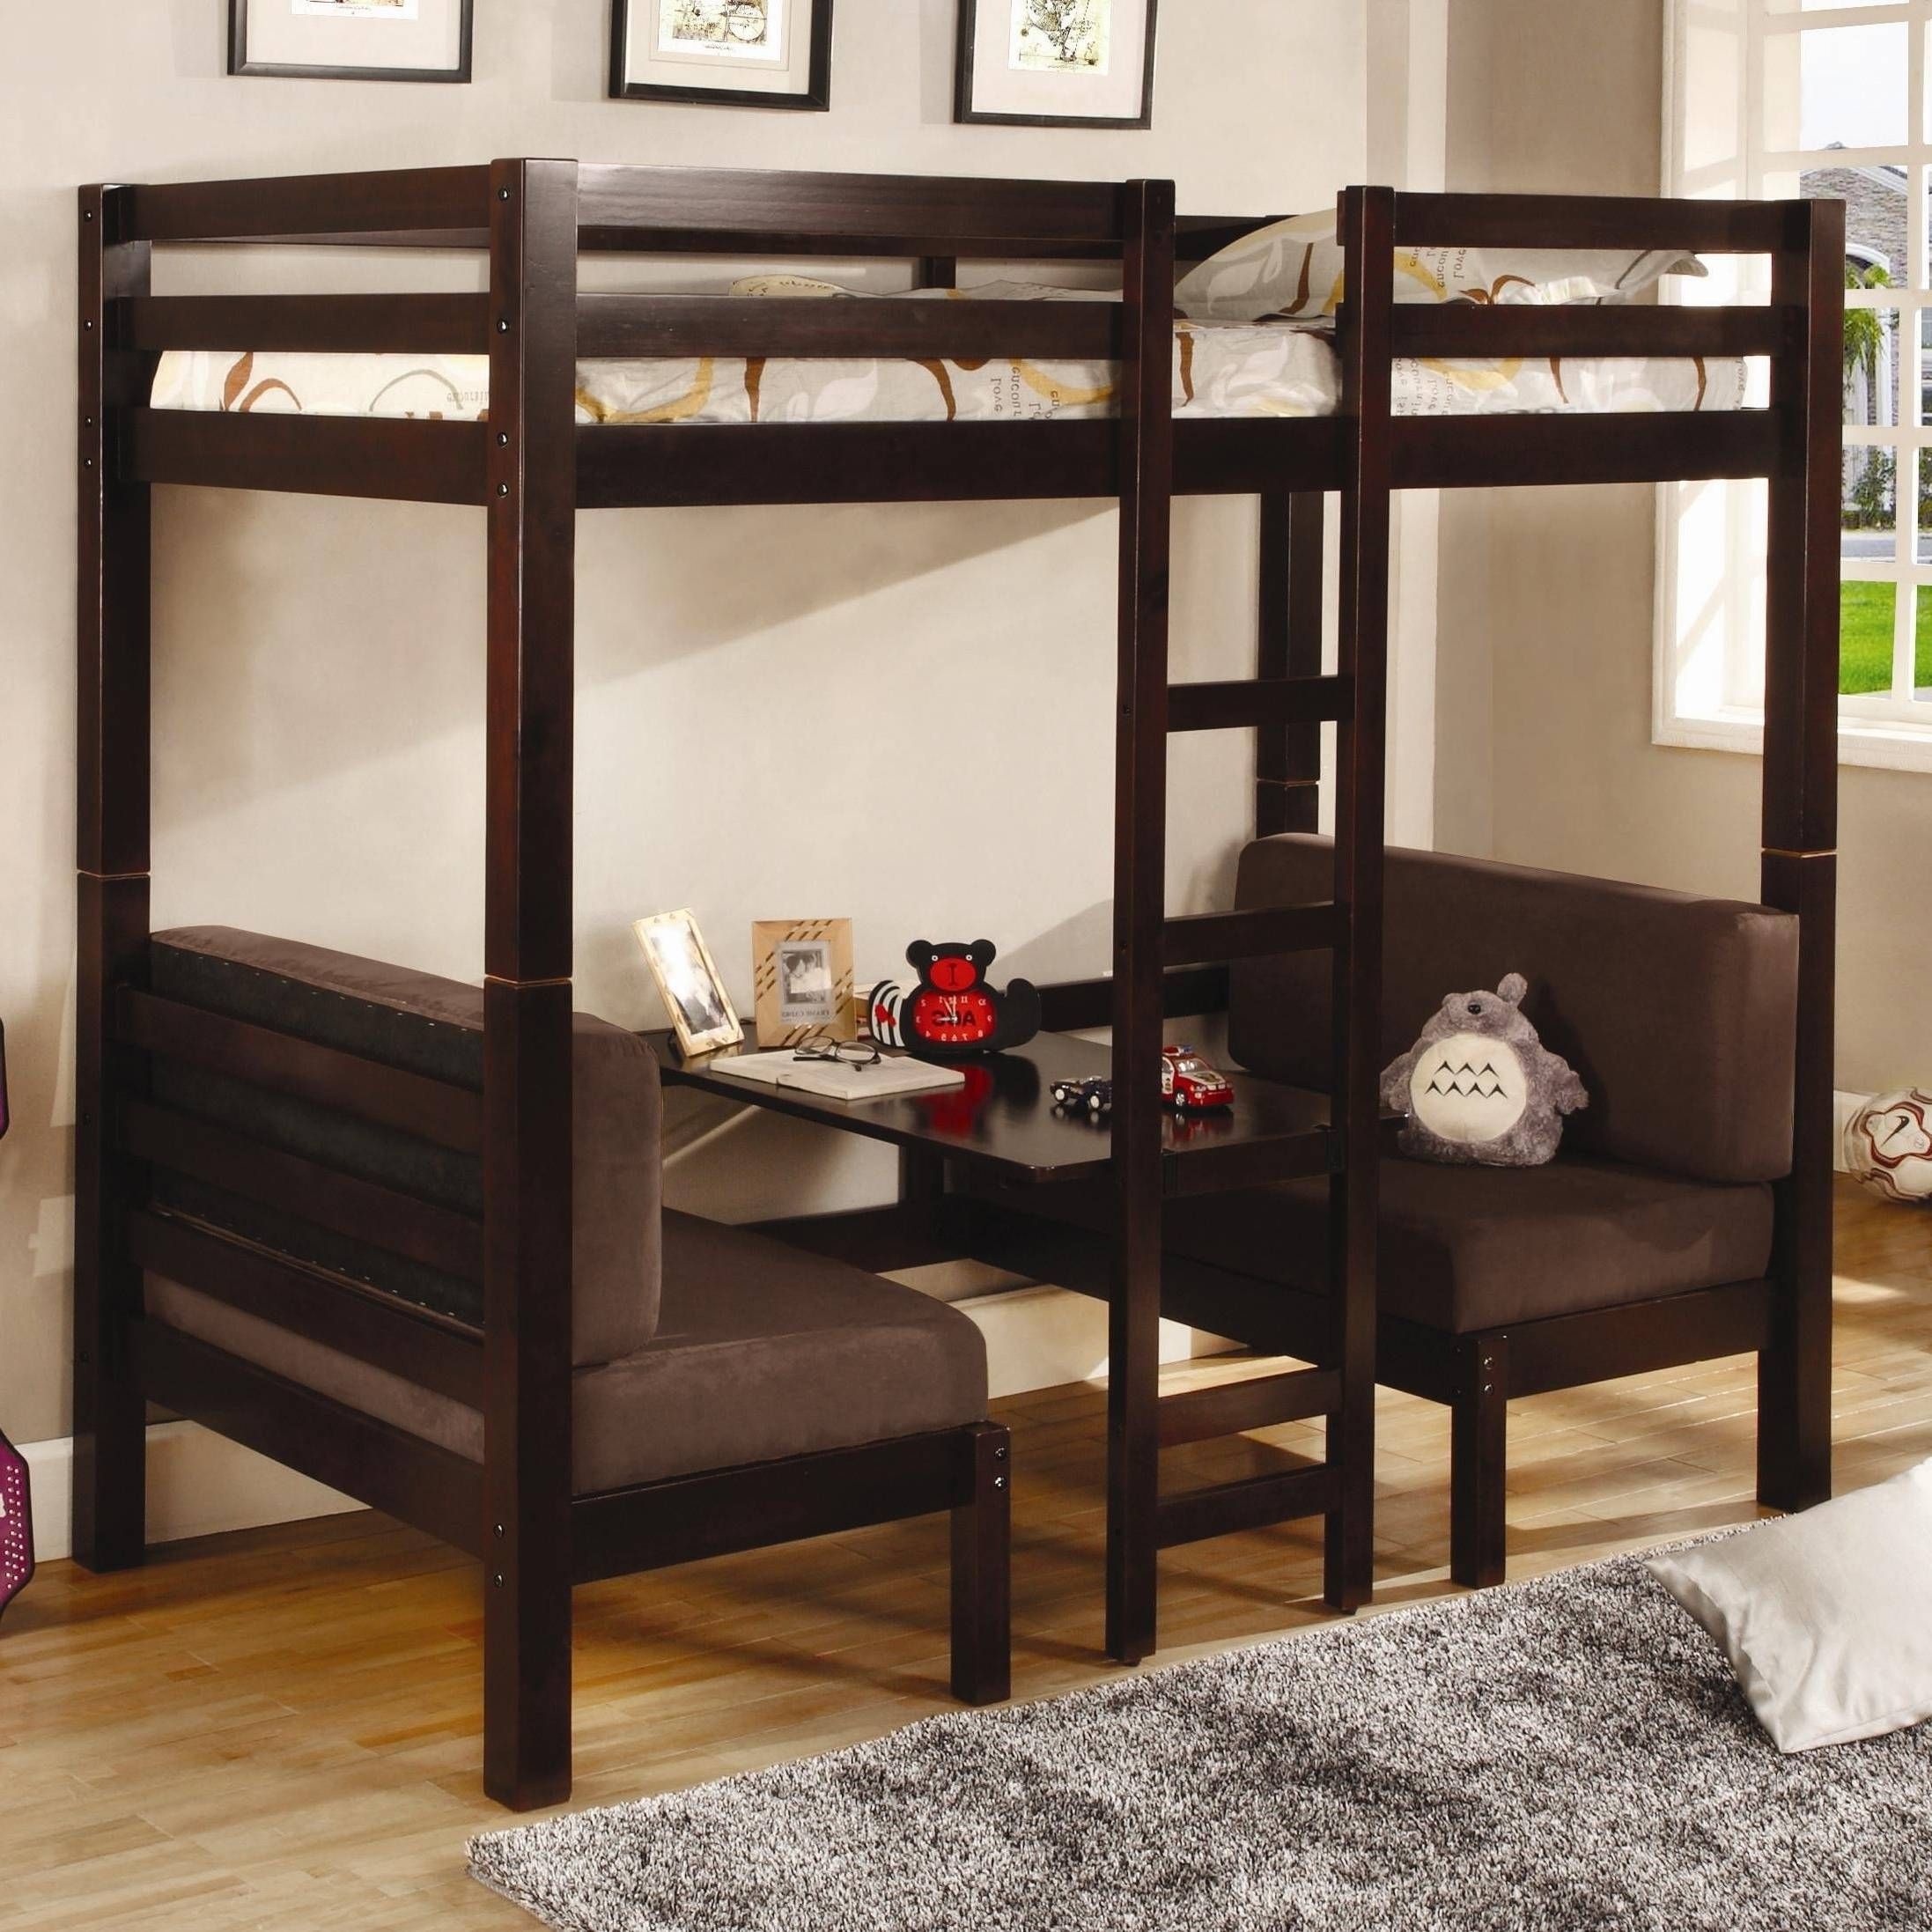 Loft Bed With Desk And Couch Beds Frames Bases Dining Tables Shoe Pertaining To Desk Sideboards (View 10 of 30)